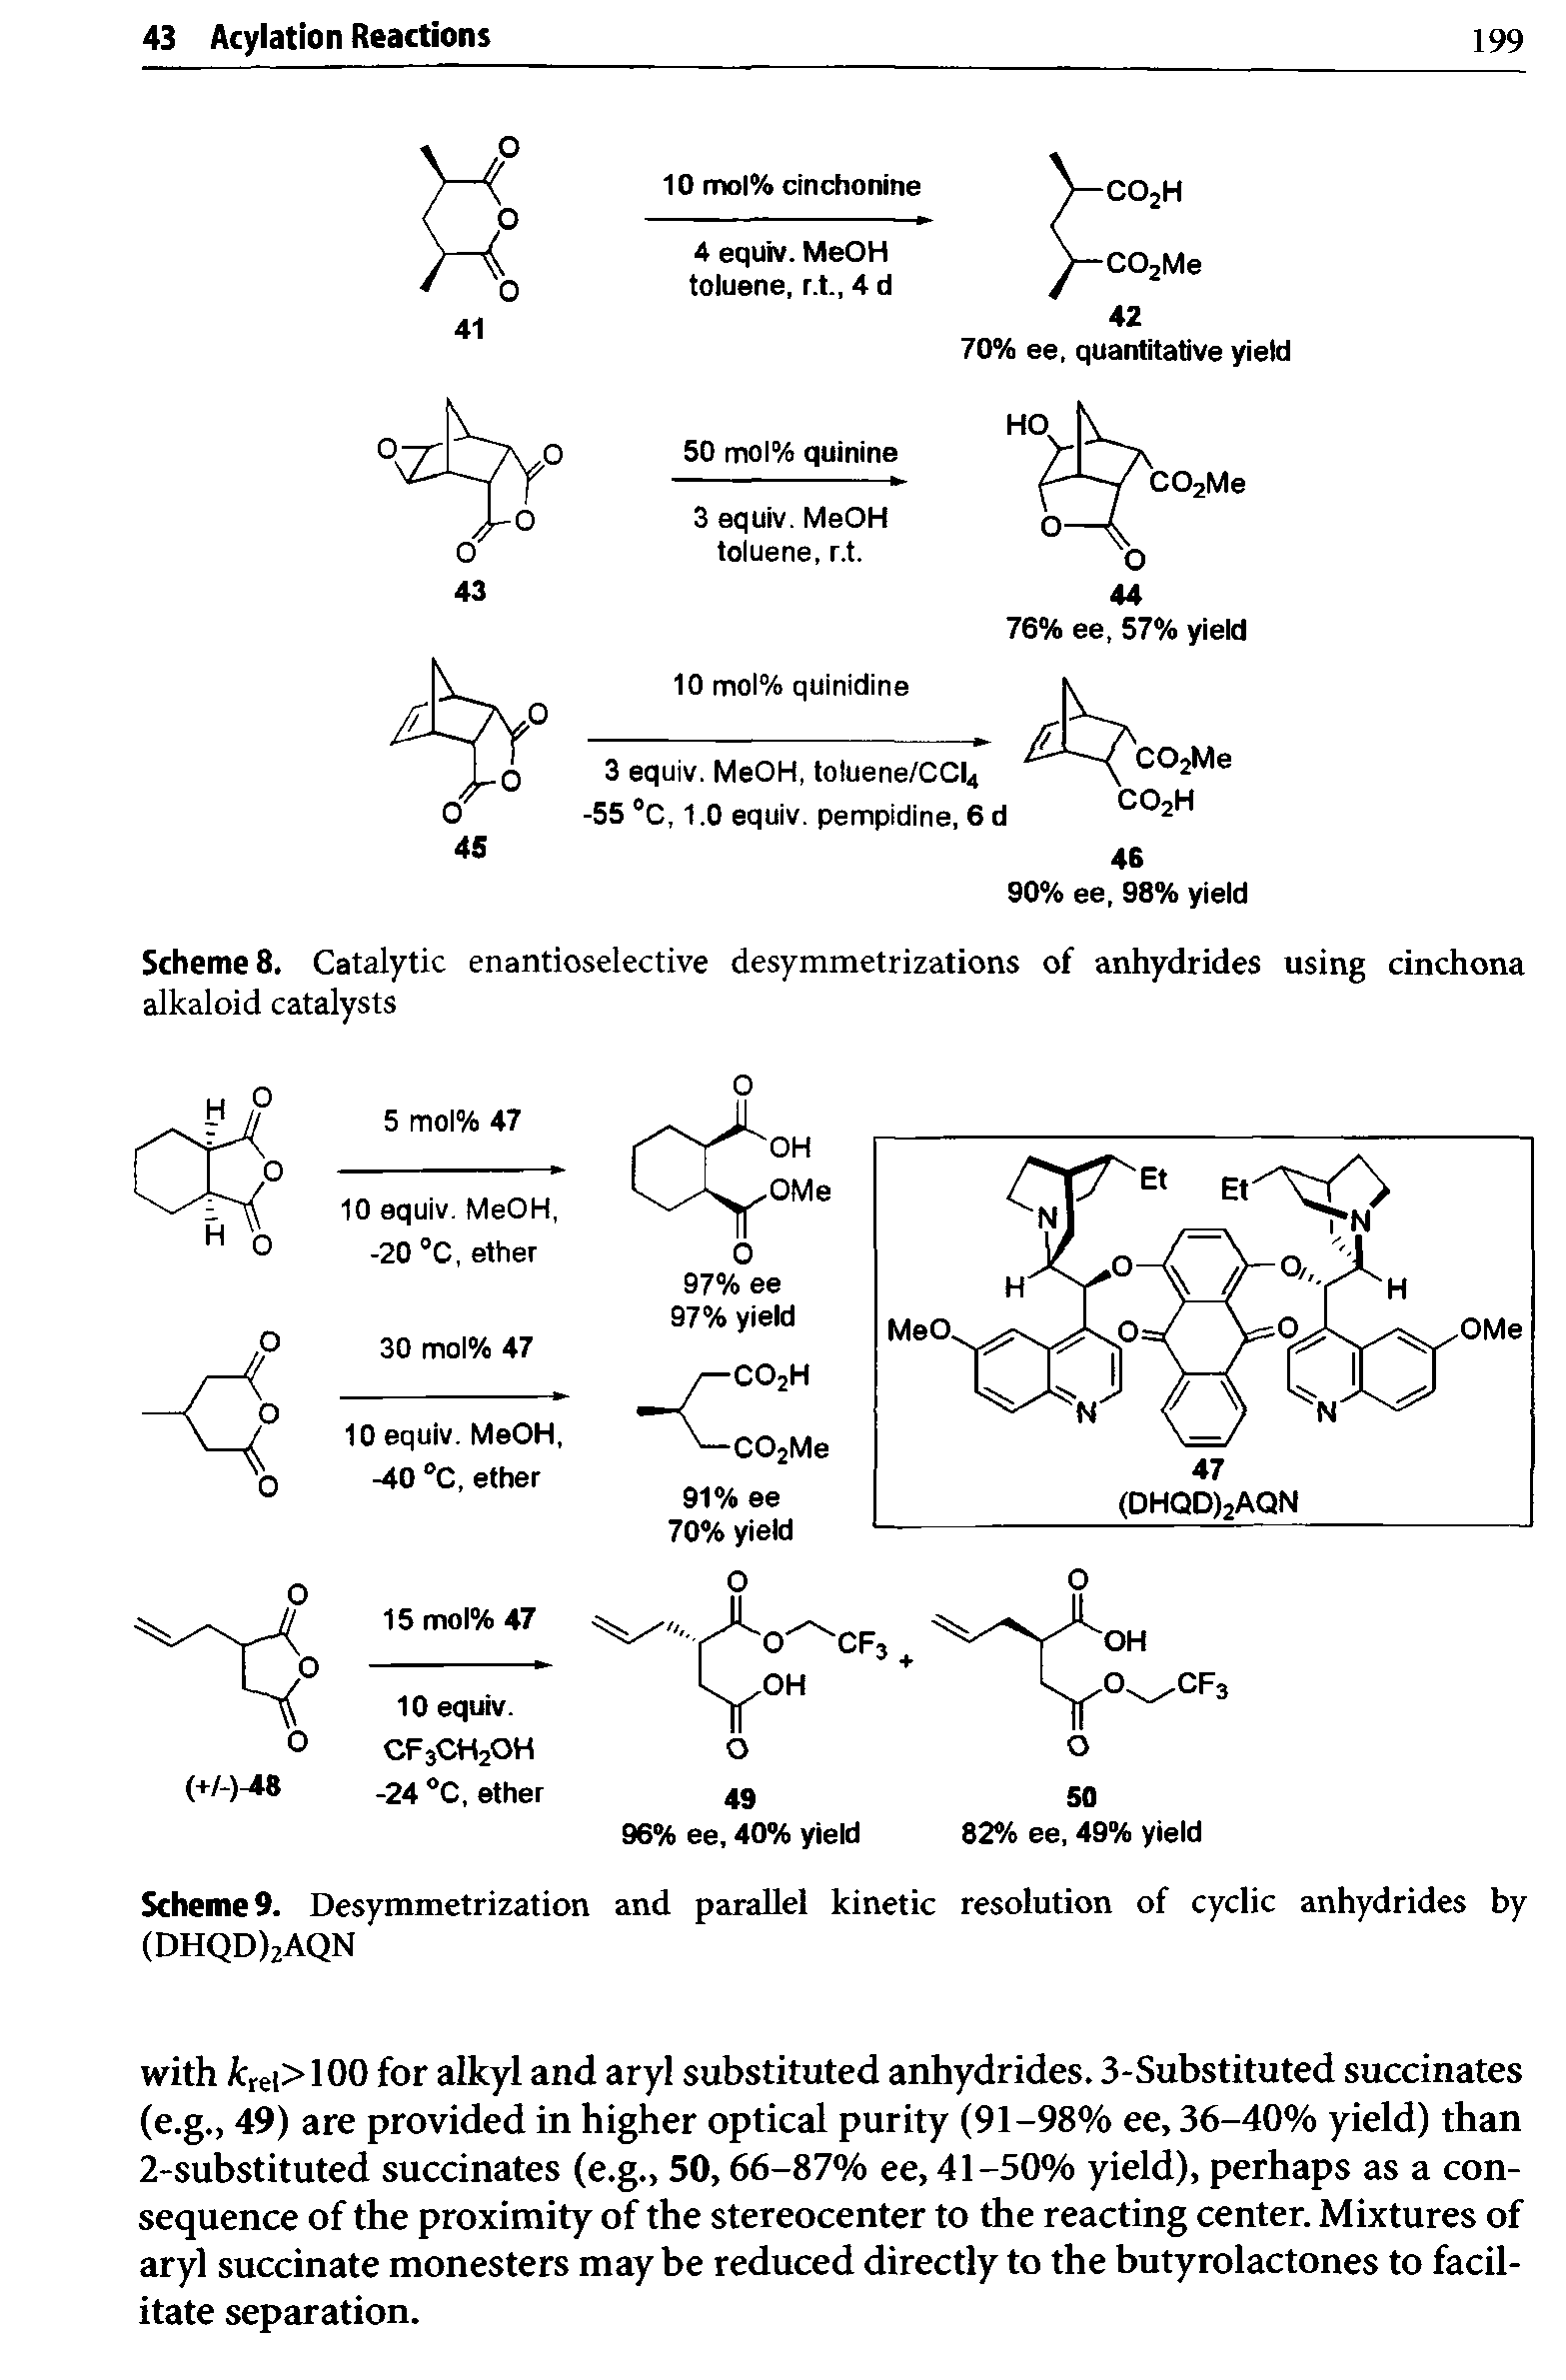 Scheme 9. Desymmetrization and parallel kinetic resolution of cyclic anhydrides by (DHQD)2AQN...